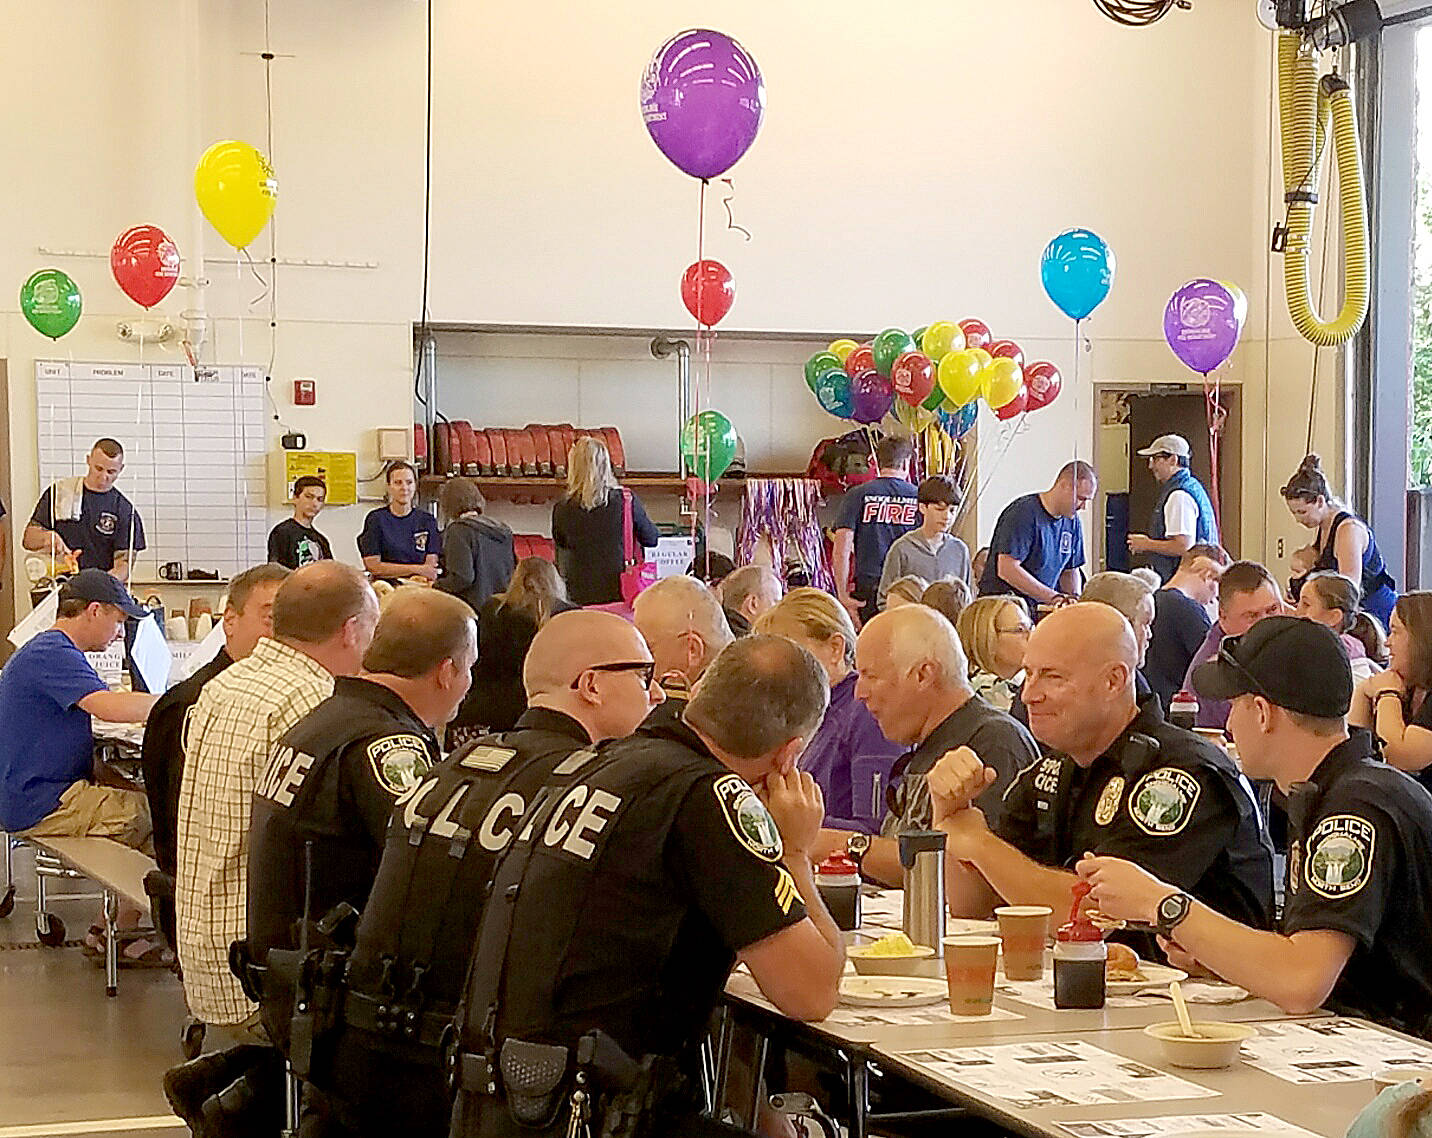 Guests enjoy a pancake breakfast at the Snoqualmie Fire Station during the 2016 event. (Courtesy Photo)